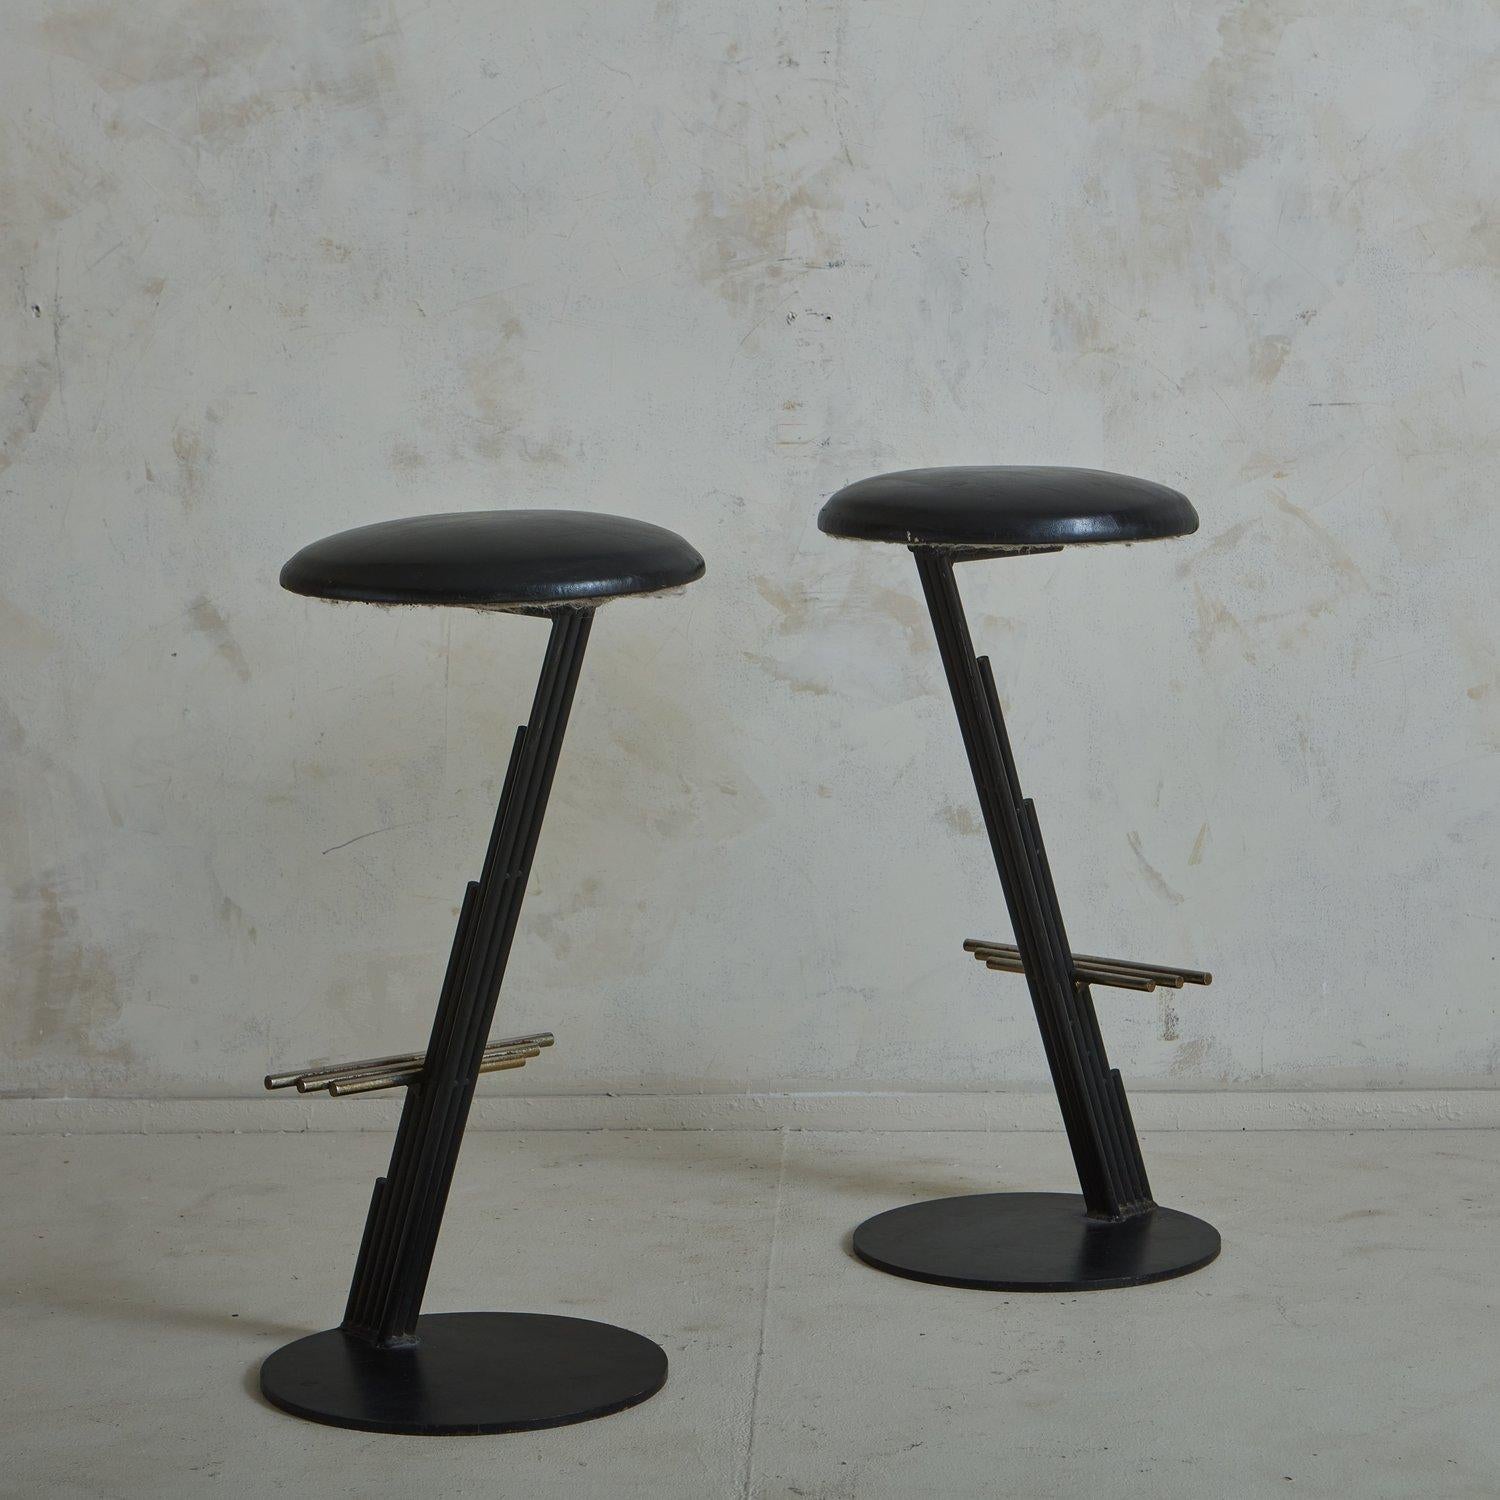 American Pair of Brutalist Cantilever Stools By Curtis Jere, 1980s For Sale